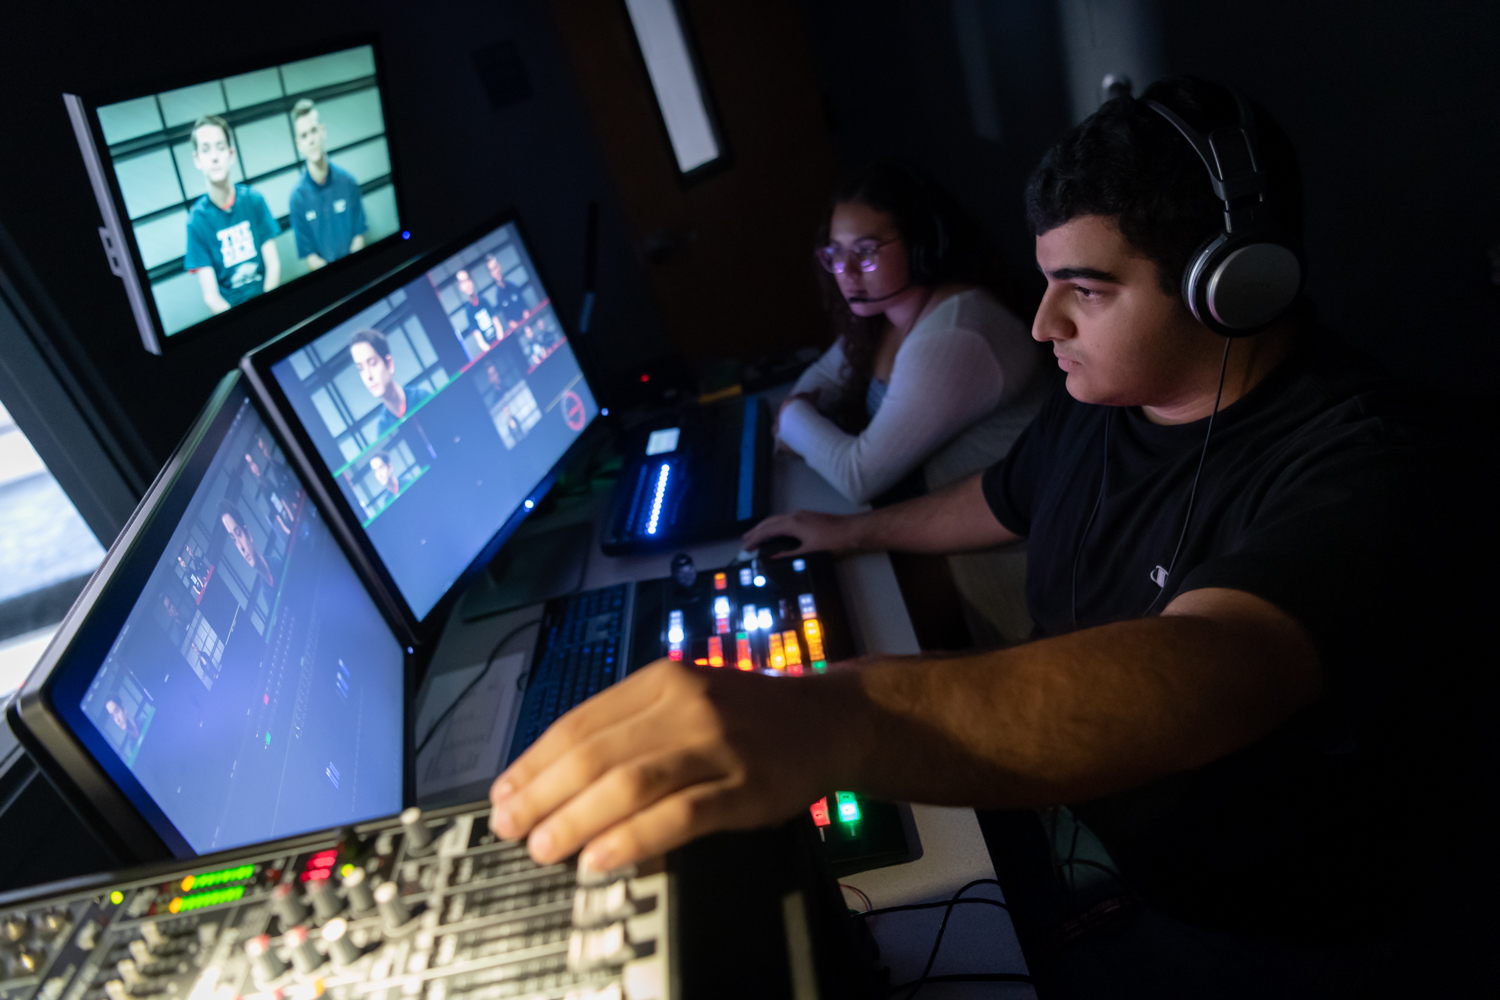 Students working in control booth for tv broadcast